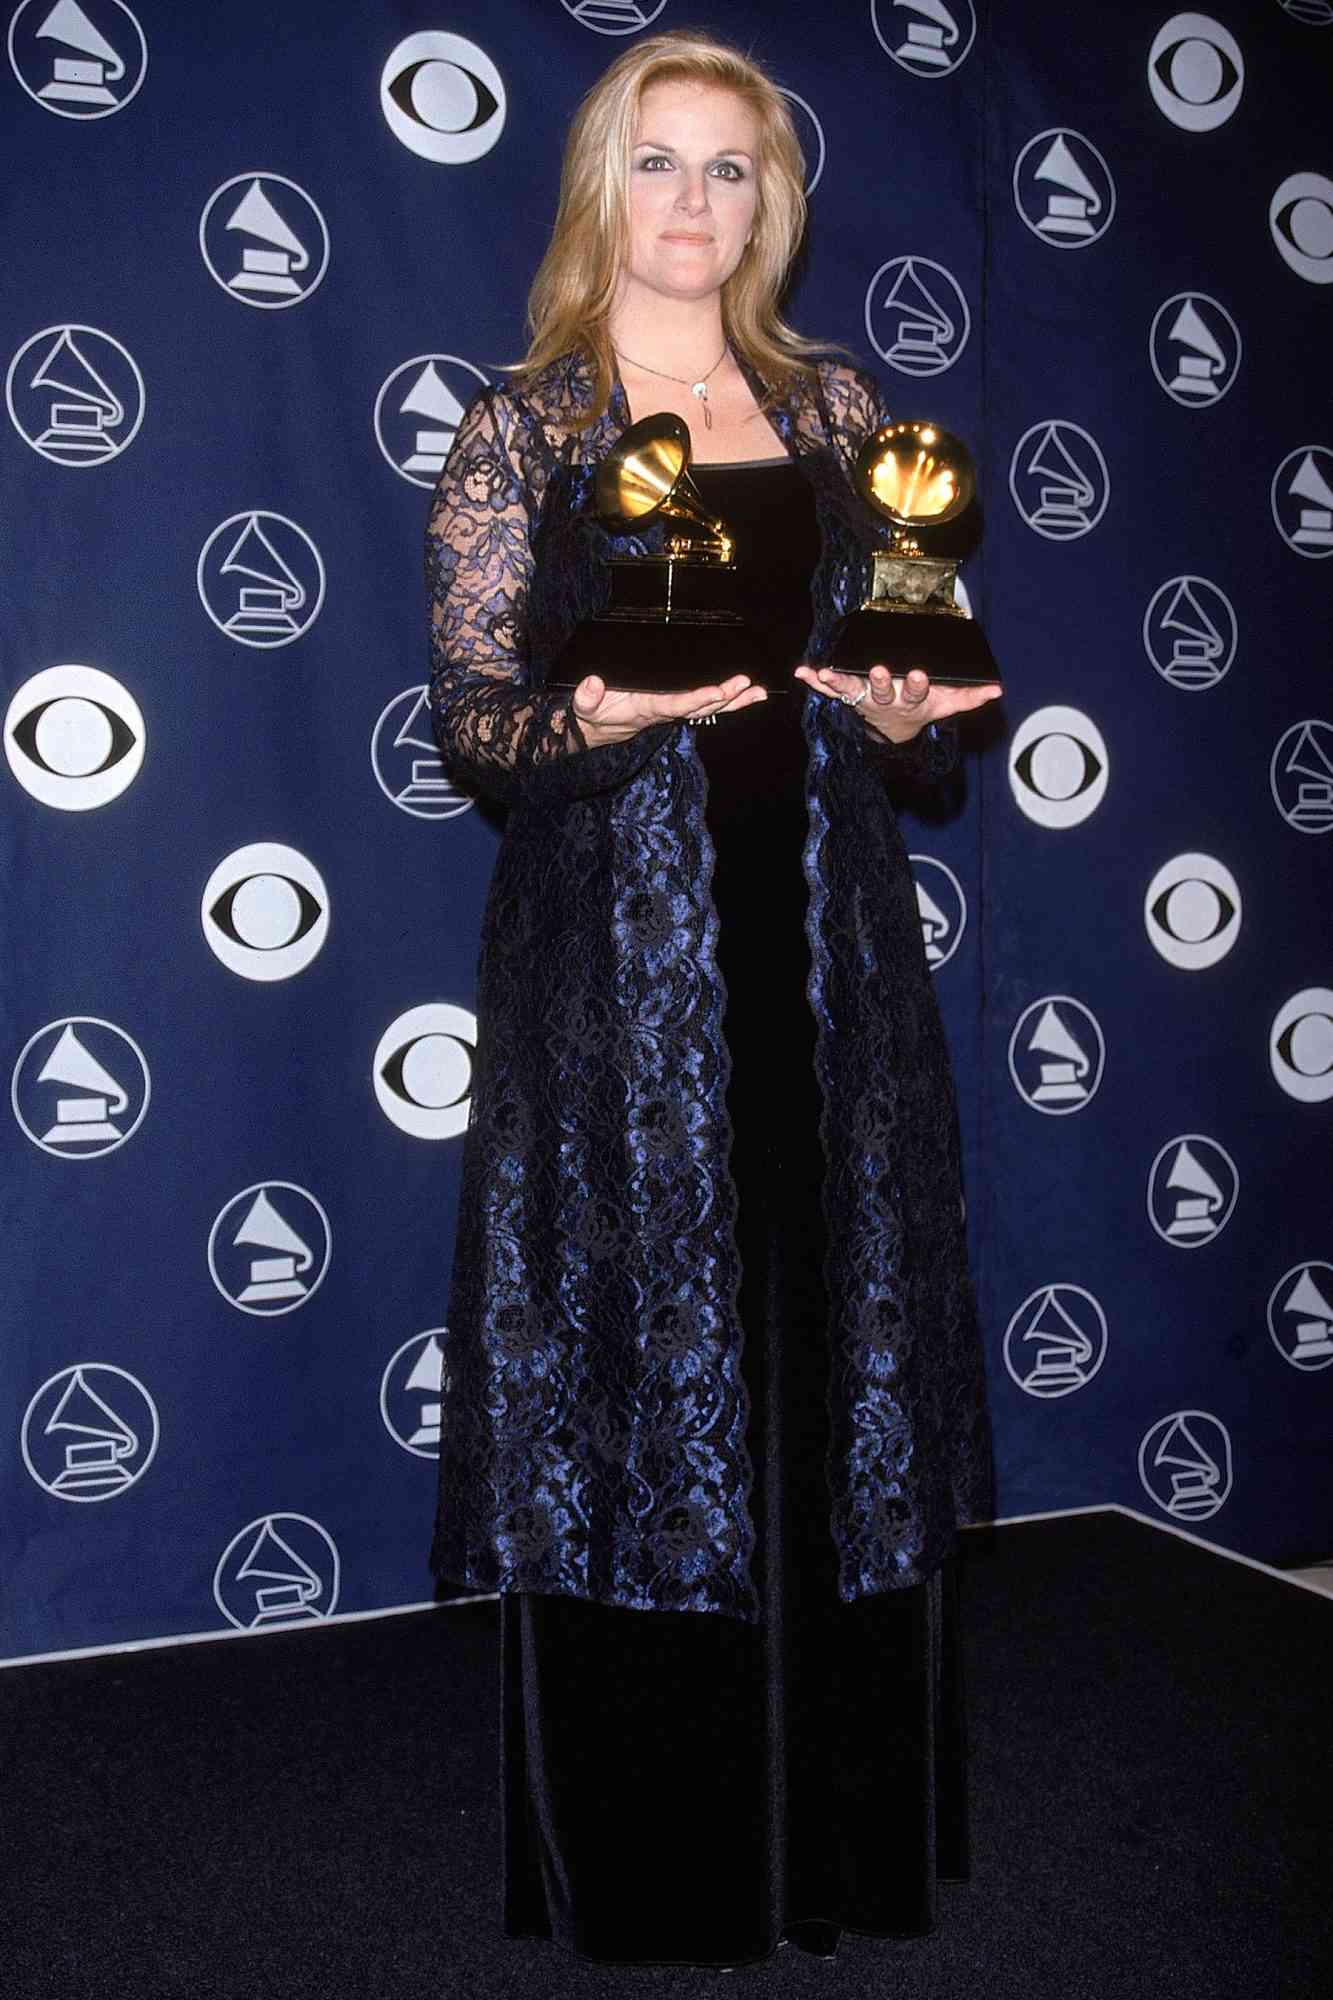 Best Female Country Vocal Performance and Best Country Collaboration With Vocals winner Trisha Yearwood (How Do I Live, In Another's Eyes)